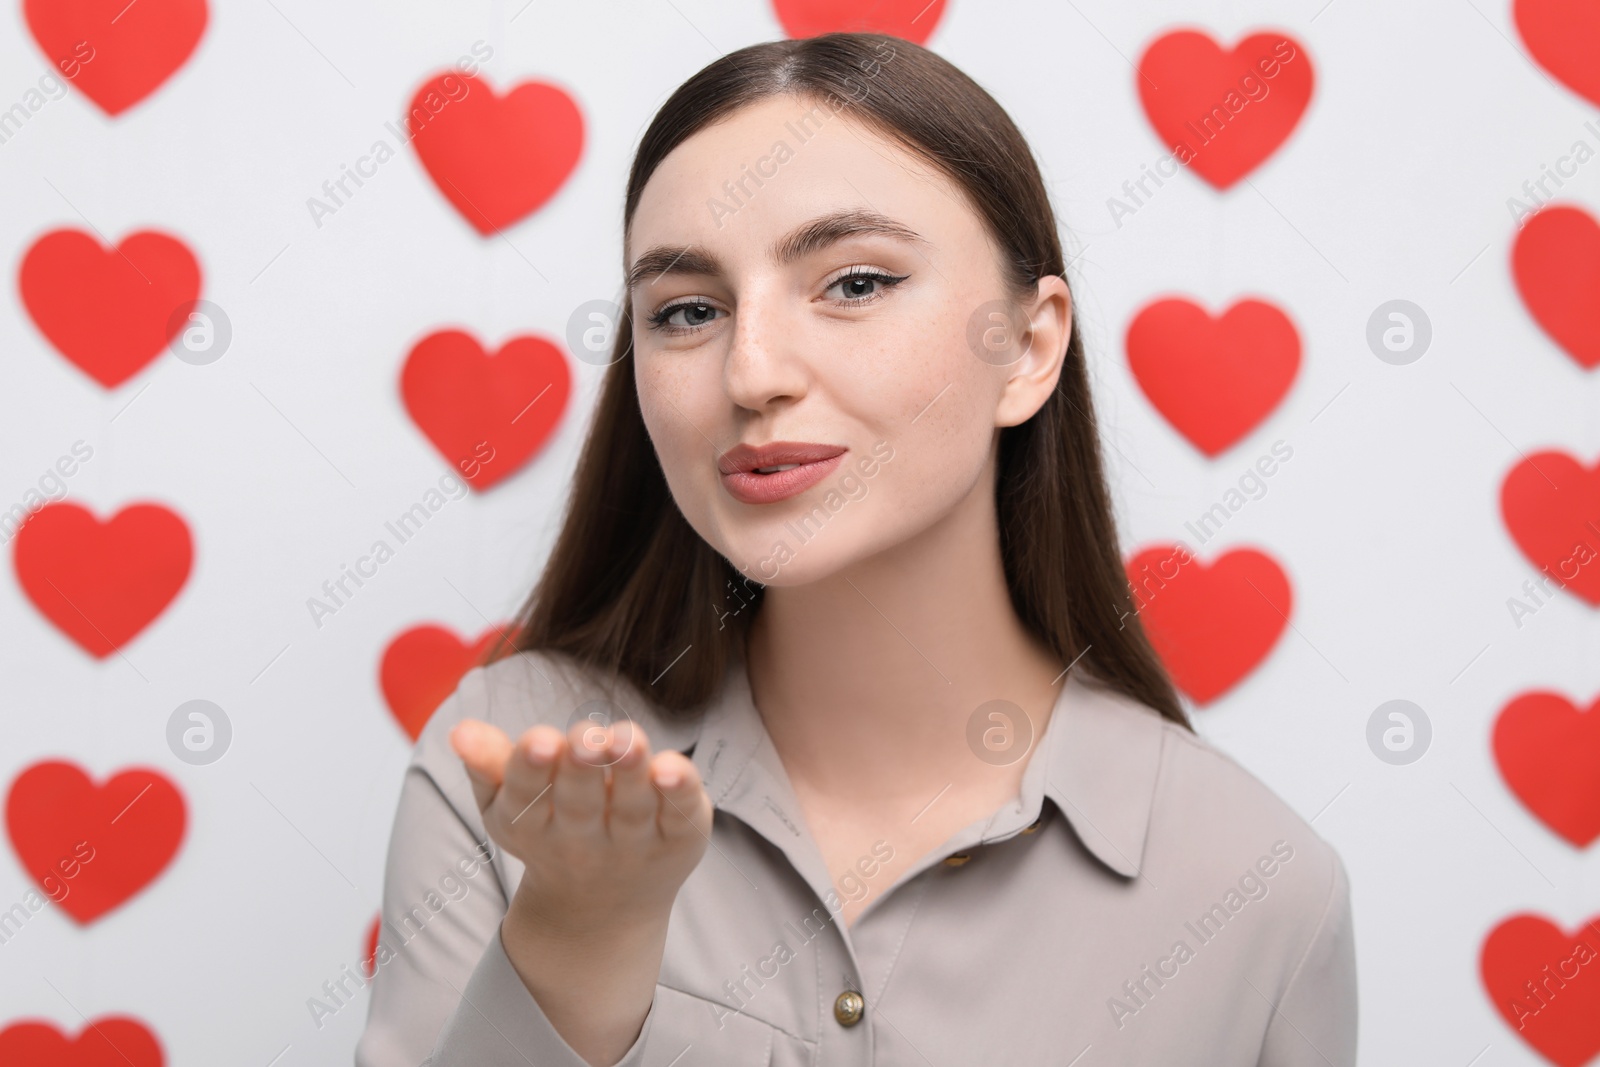 Photo of Beautiful woman blowing kiss on decorated background